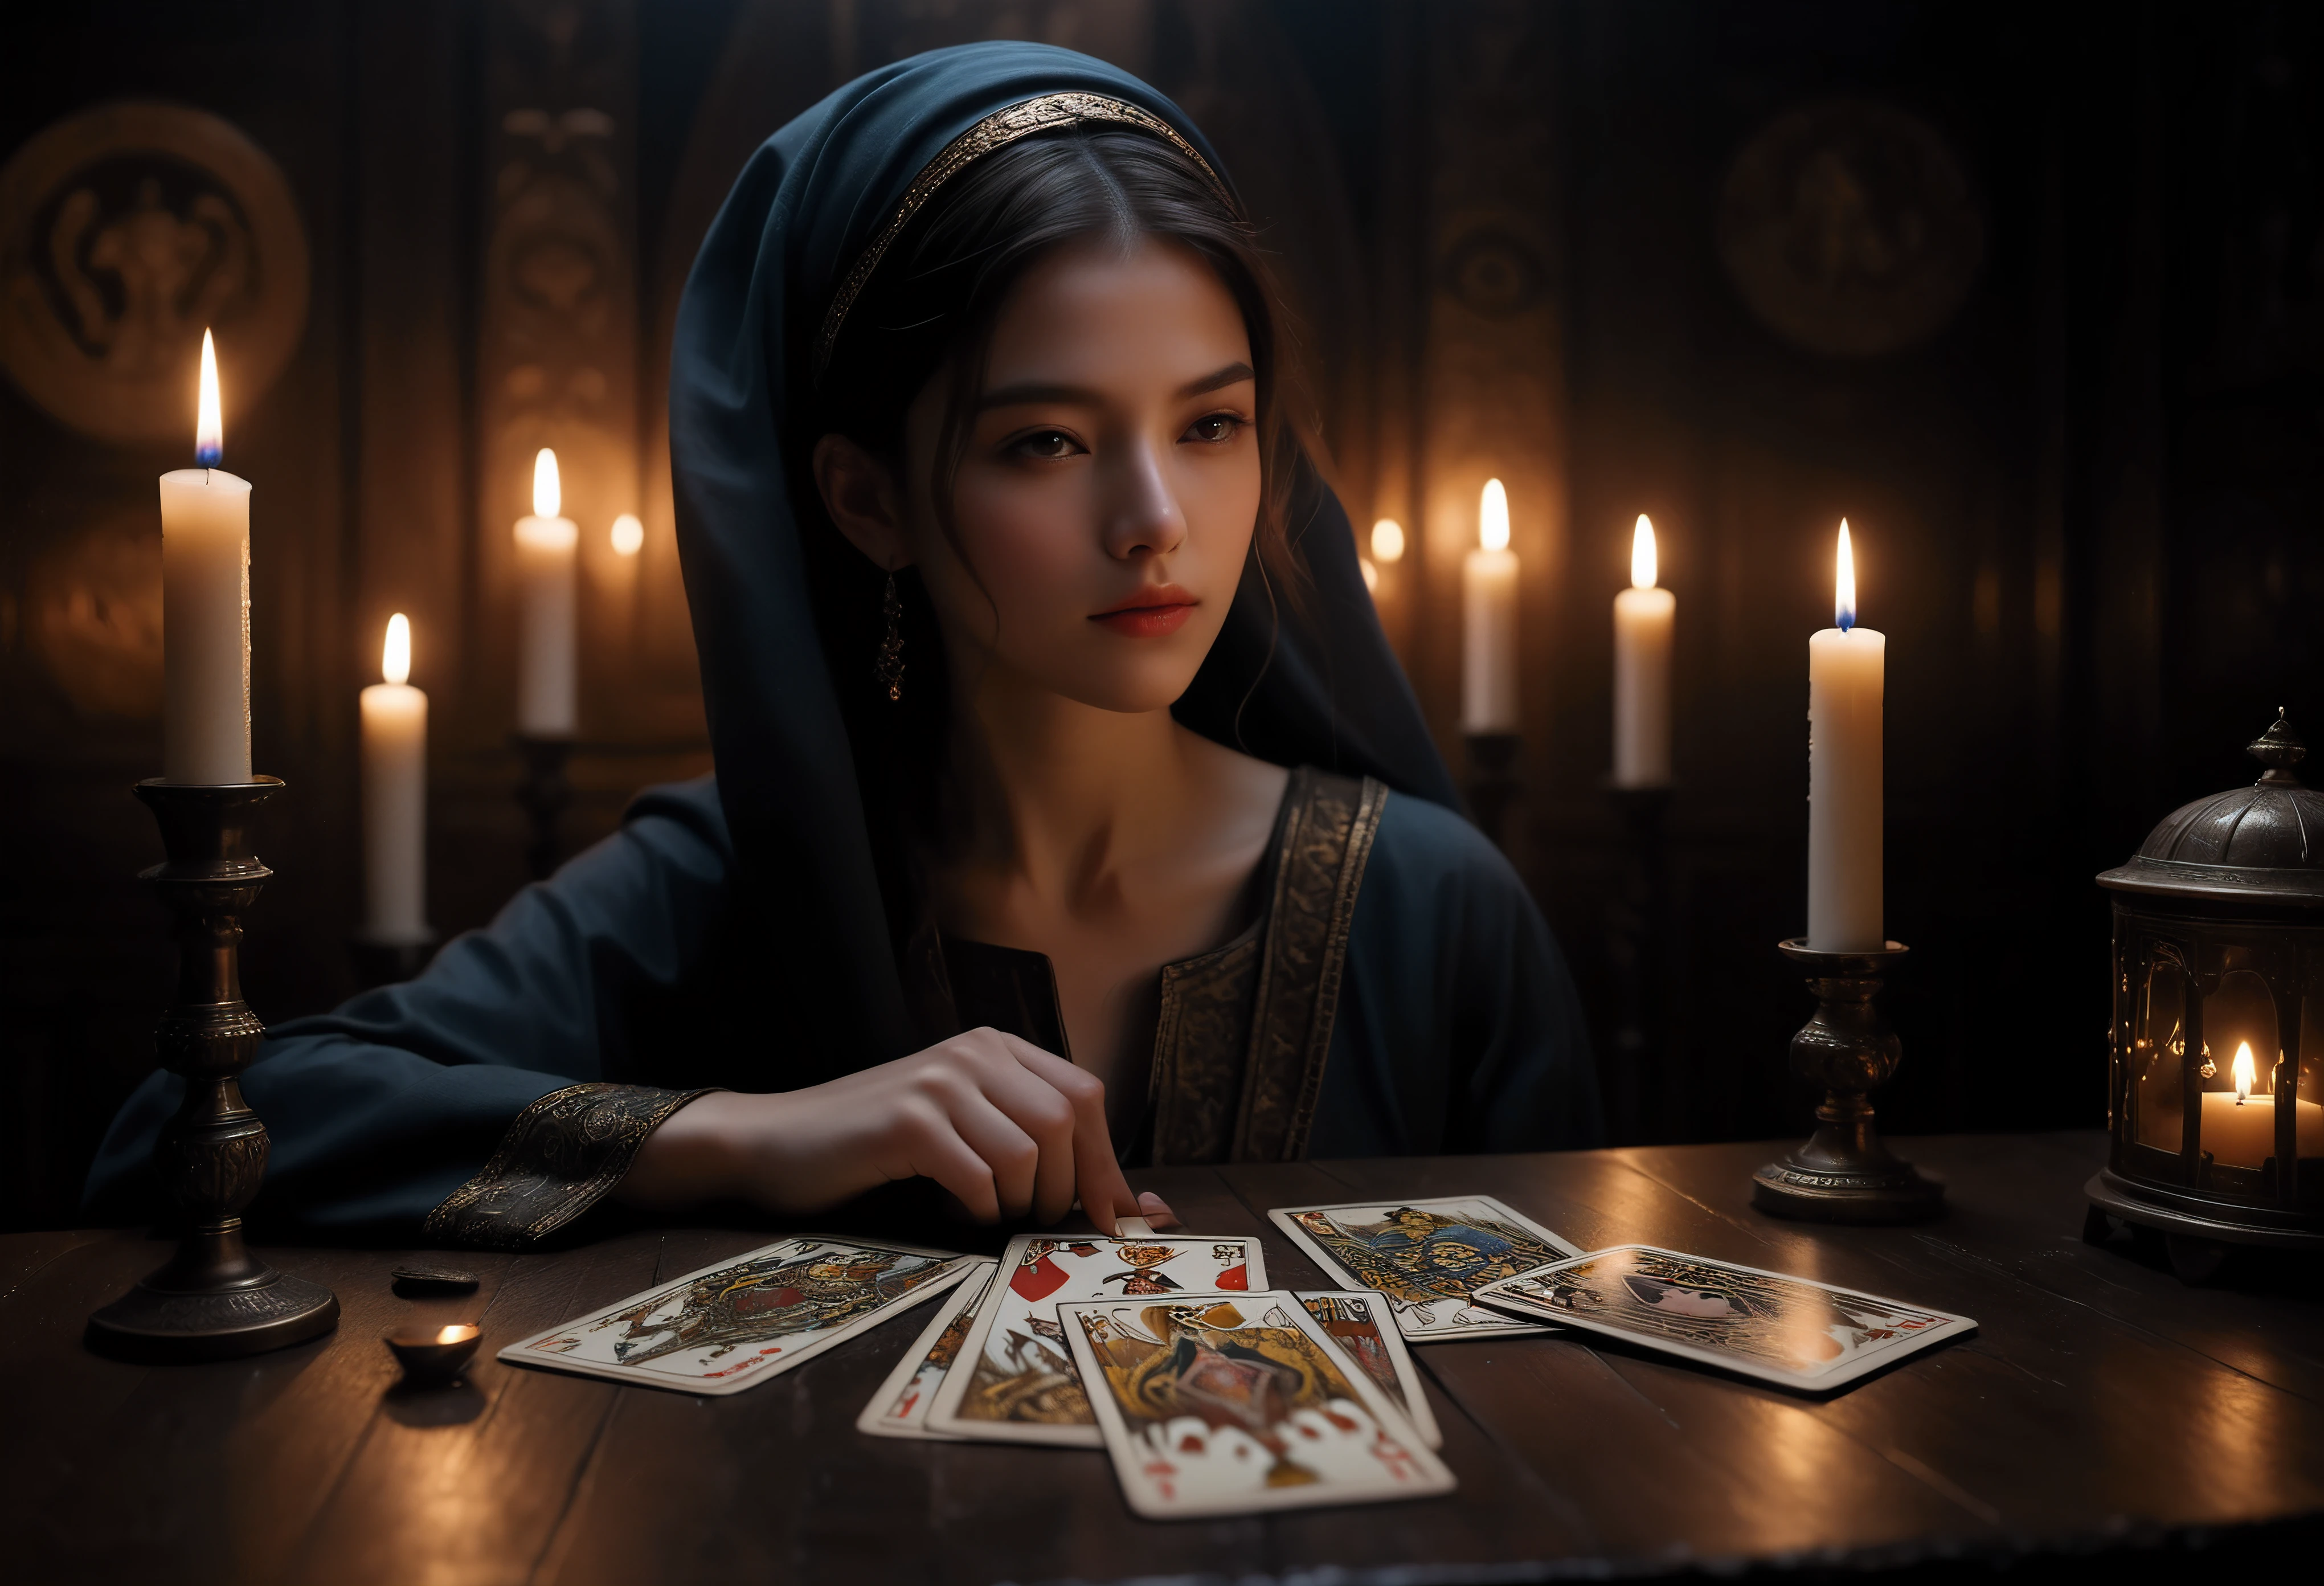 ((Masterpiece in maximum 16K resolution):1.6),((soft_color_photograpy:)1.5), ((Ultra-Detailed):1.4),((Movie-like still images and dynamic angles):1.3). | (Macro shot cinematic photo of Tarot Cards), ((Tarot cards):1.2), (Tarot table), (focus on tarot cards), (macro lens), (exotic antiques), (Dark Candles), (luminous object), (Mysterious atmosphere), (shimmer), (aesthetic DnD vase), (visual experience),(Realism), (Realistic),award-winning graphics, dark shot, film grain, extremely detailed, Digital Art, rtx, Unreal Engine, scene concept anti glare effect, All captured with sharp focus. | Rendered in ultra-high definition with UHD and retina quality, this masterpiece ensures anatomical correctness and textured skin with super detail. With a focus on high quality and accuracy, this award-winning portrayal captures every nuance in stunning 16k resolution, immersing viewers in its lifelike depiction. | ((perfect_composition, perfect_design, perfect_layout, perfect_detail, ultra_detailed)), ((enhance_all, fix_everything)), More Detail, Enhance.